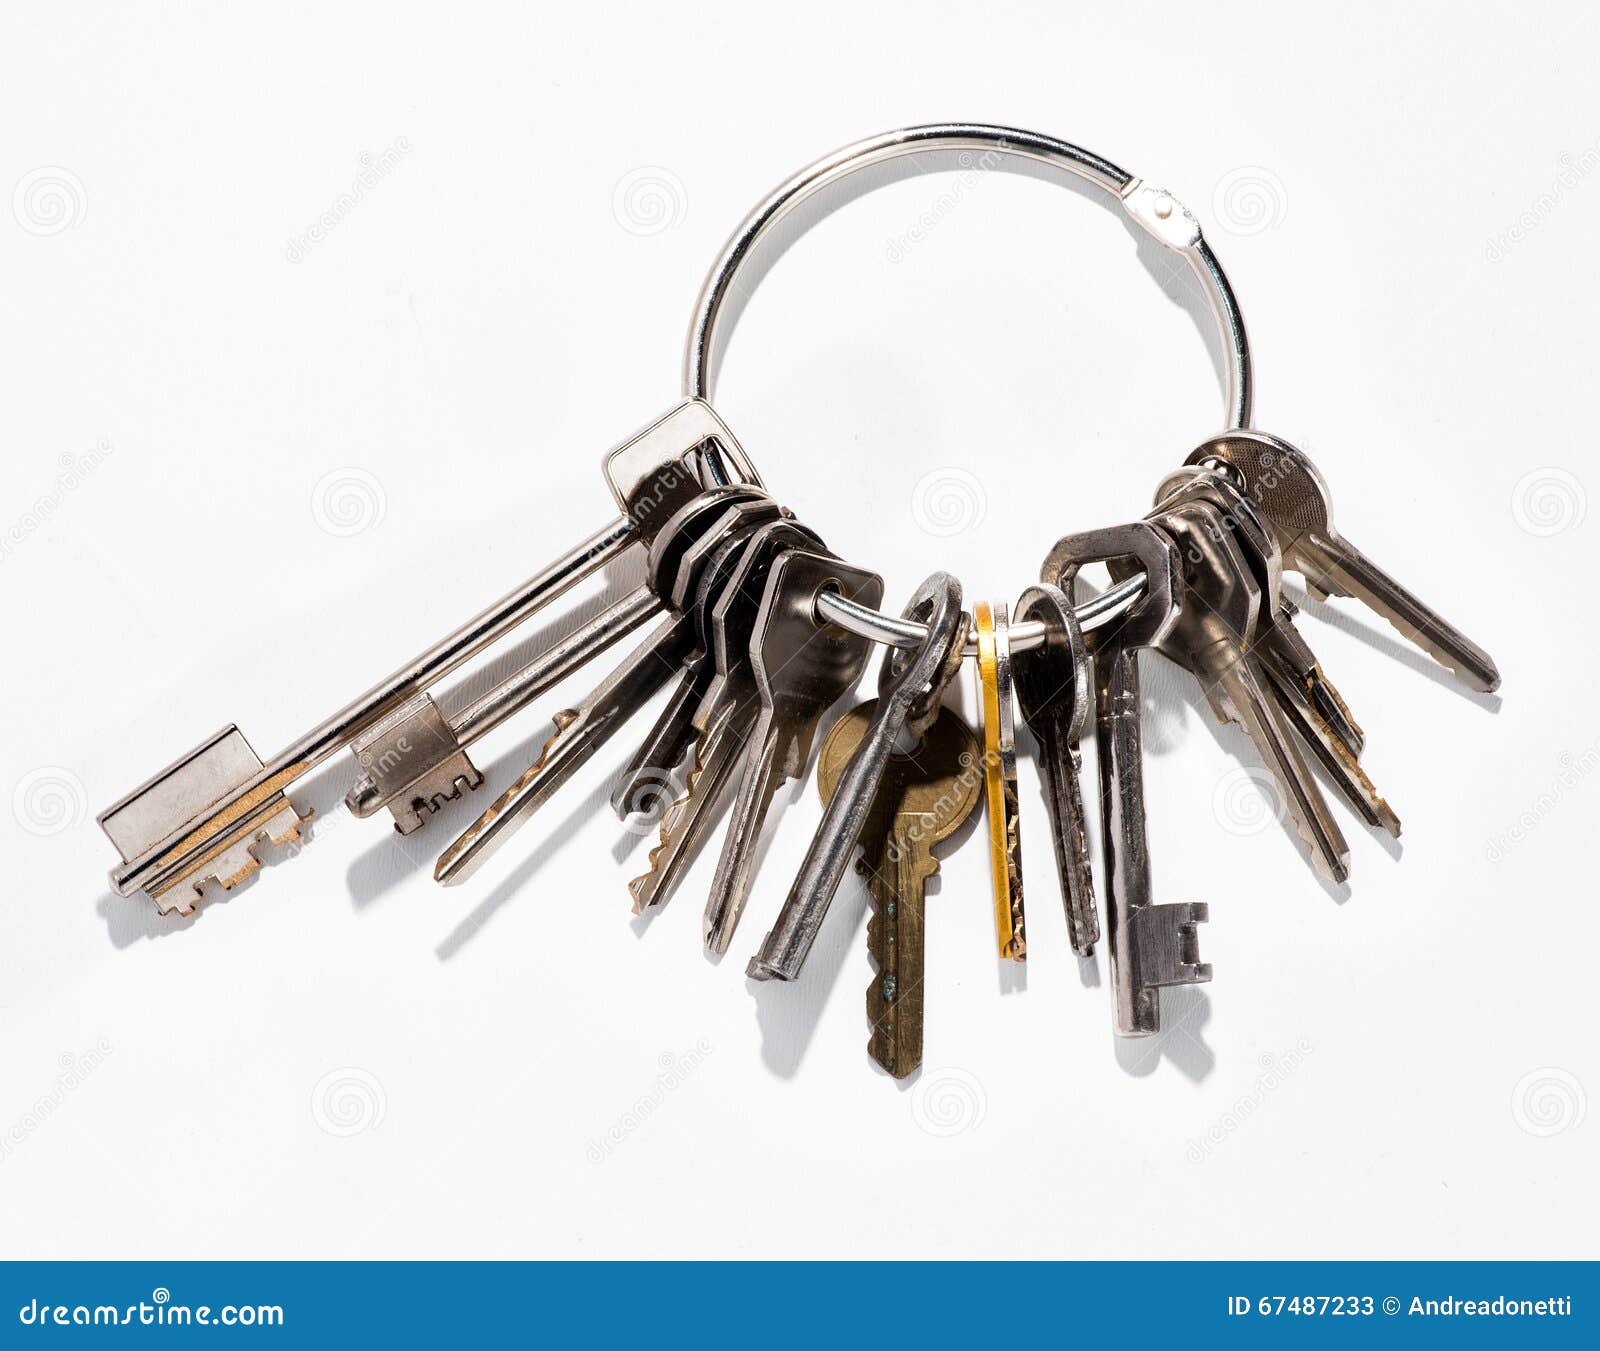 What is the best way to store bunches of keys? - How to store bunches of  keys